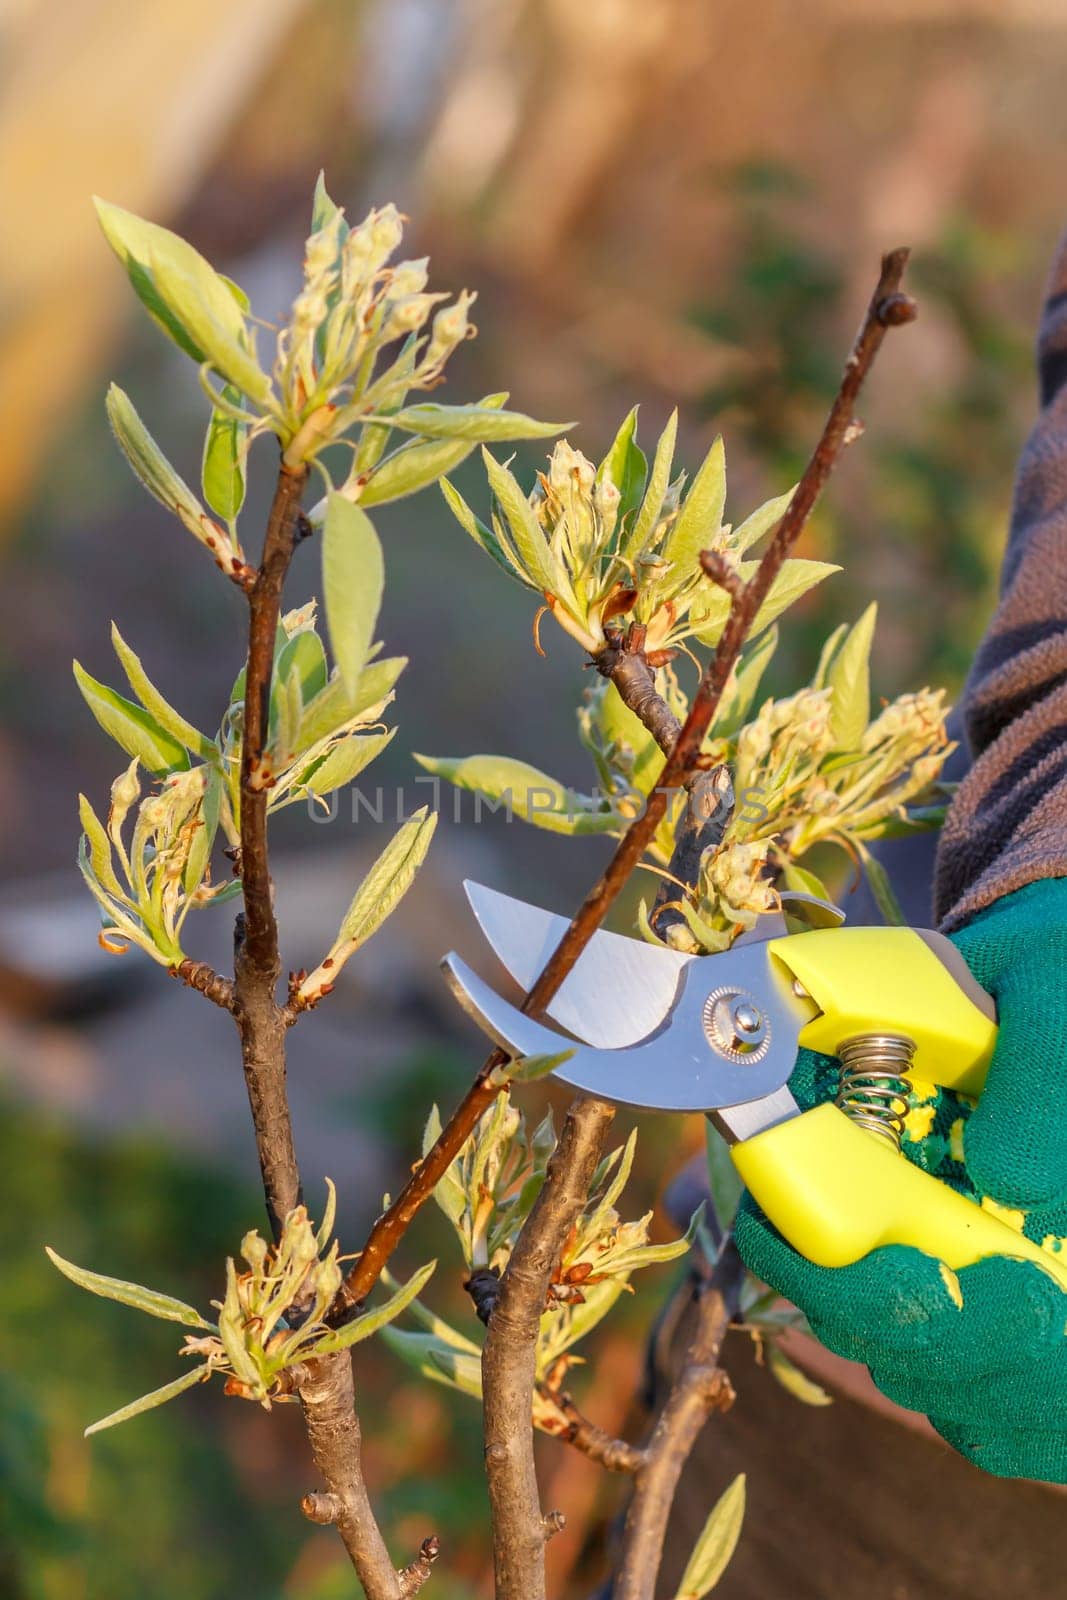 Female farmer with pruner shears the tips of pear tree by mvg6894